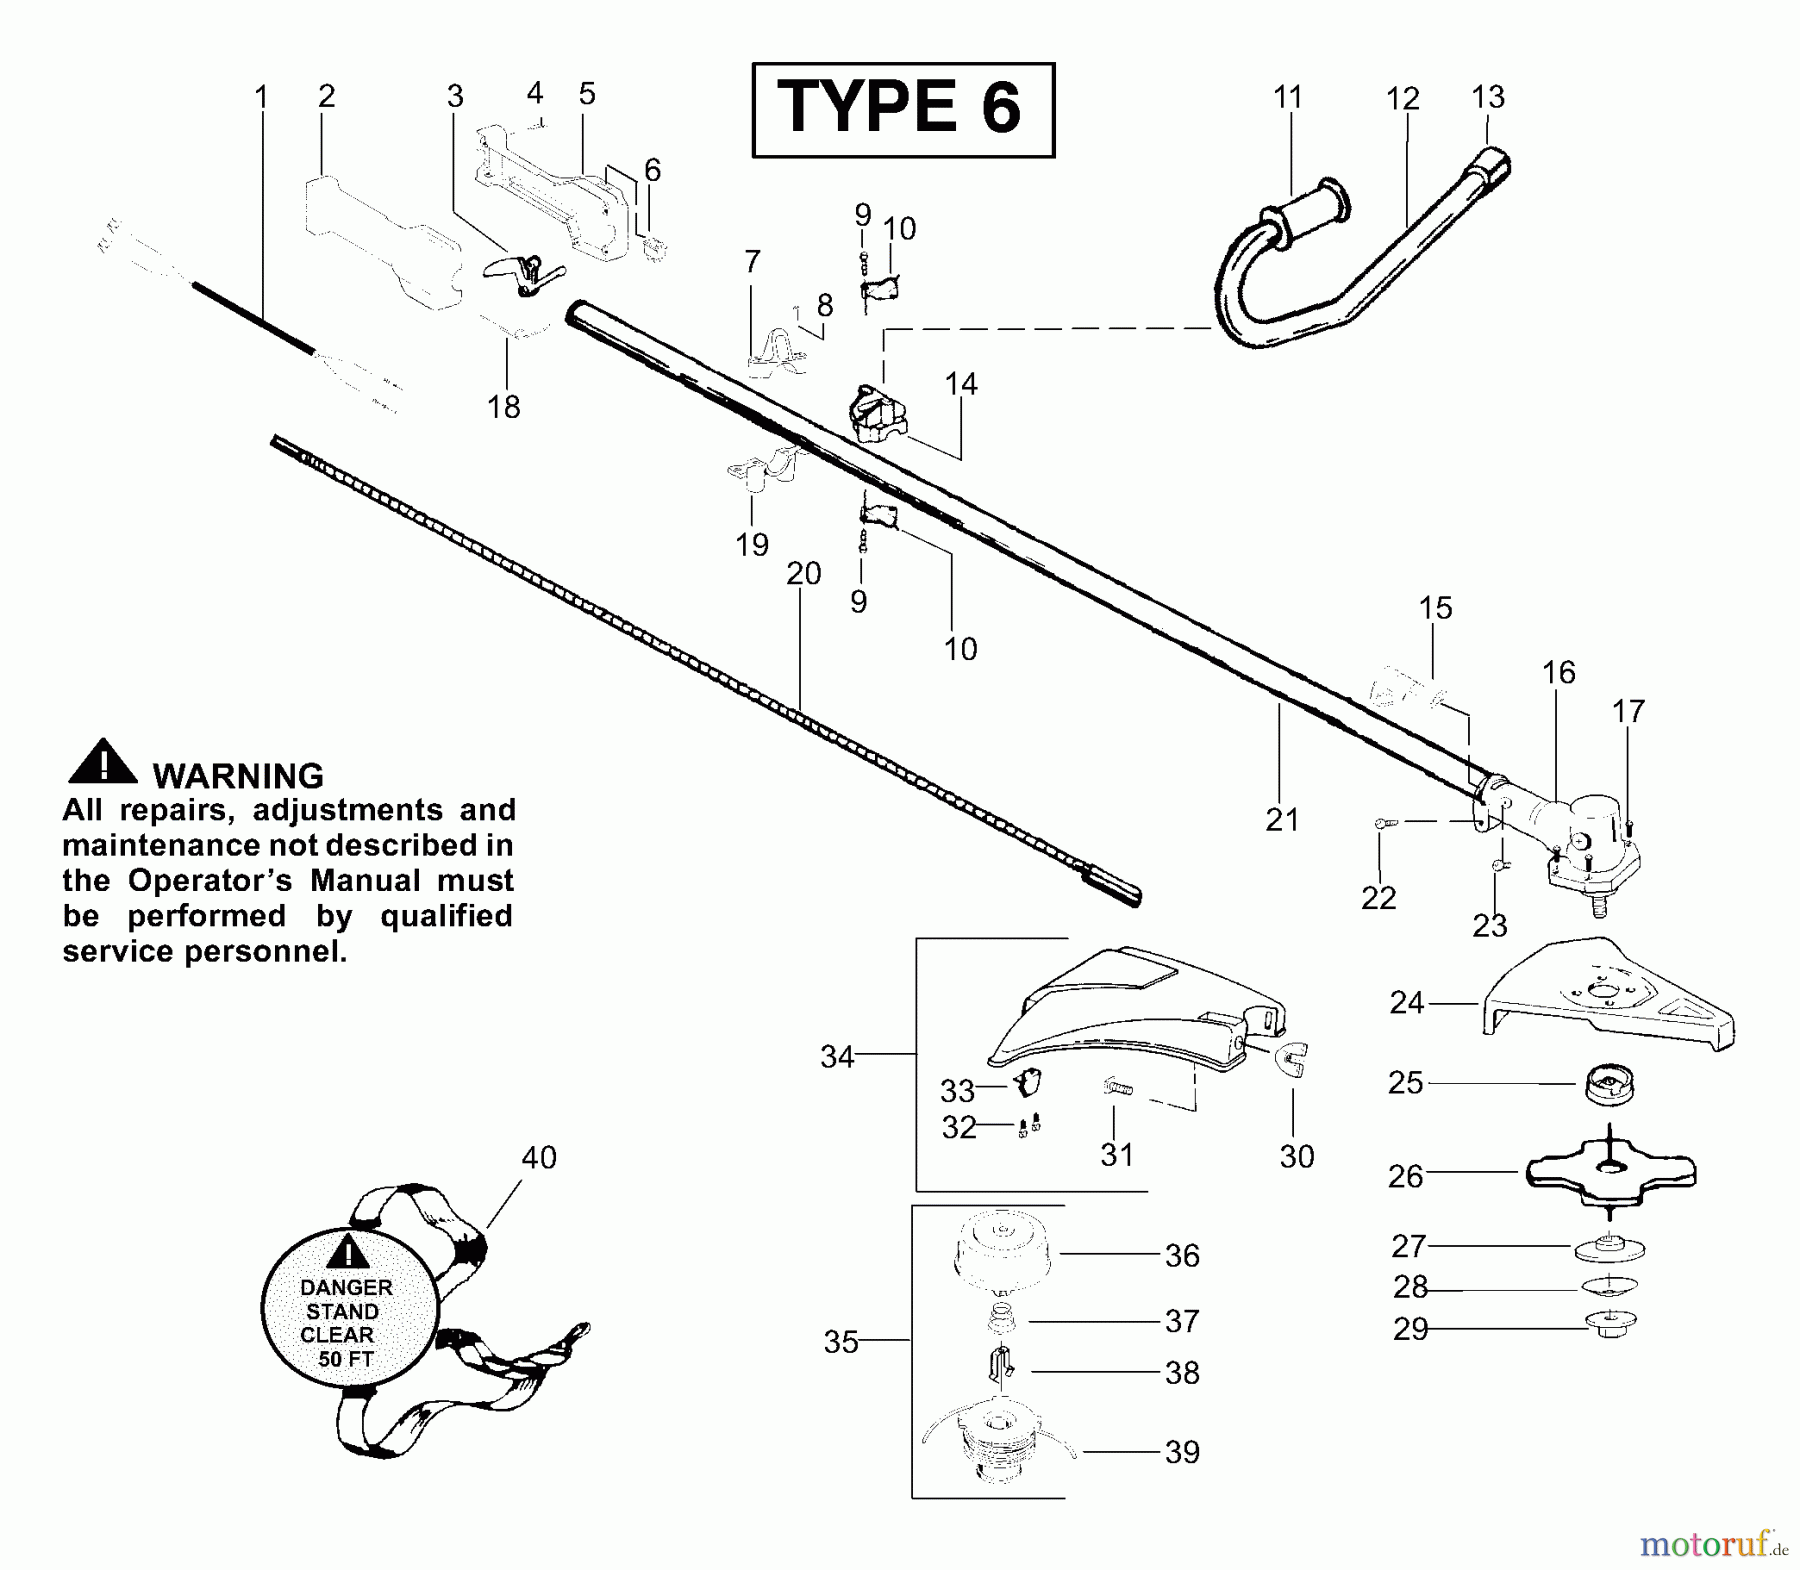  Poulan / Weed Eater Motorsensen, Trimmer BC2400 (Type 6) - Weed Eater String Trimmer Handle, Chassis & Bar Assembly Type 6